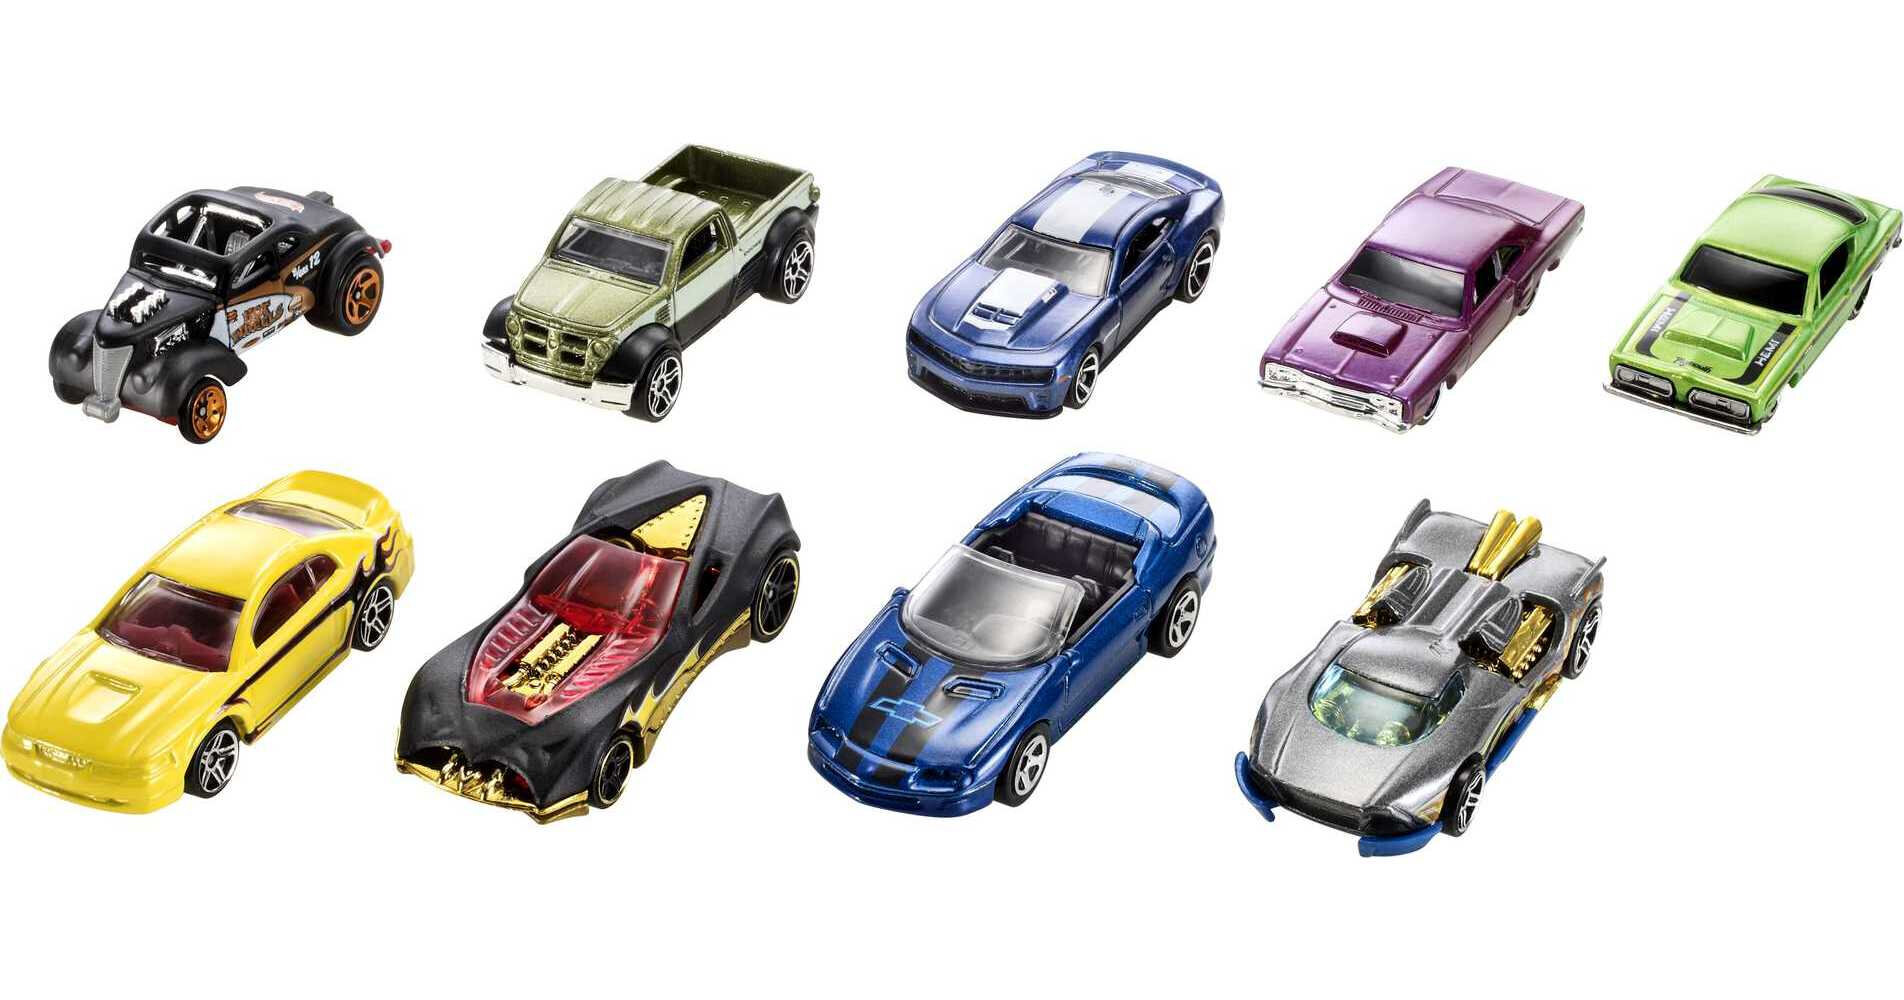 Hot Wheels Gift Set of 9 Toy Cars or Trucks in 1:64 Scale (Styles May Vary) - image 1 of 7